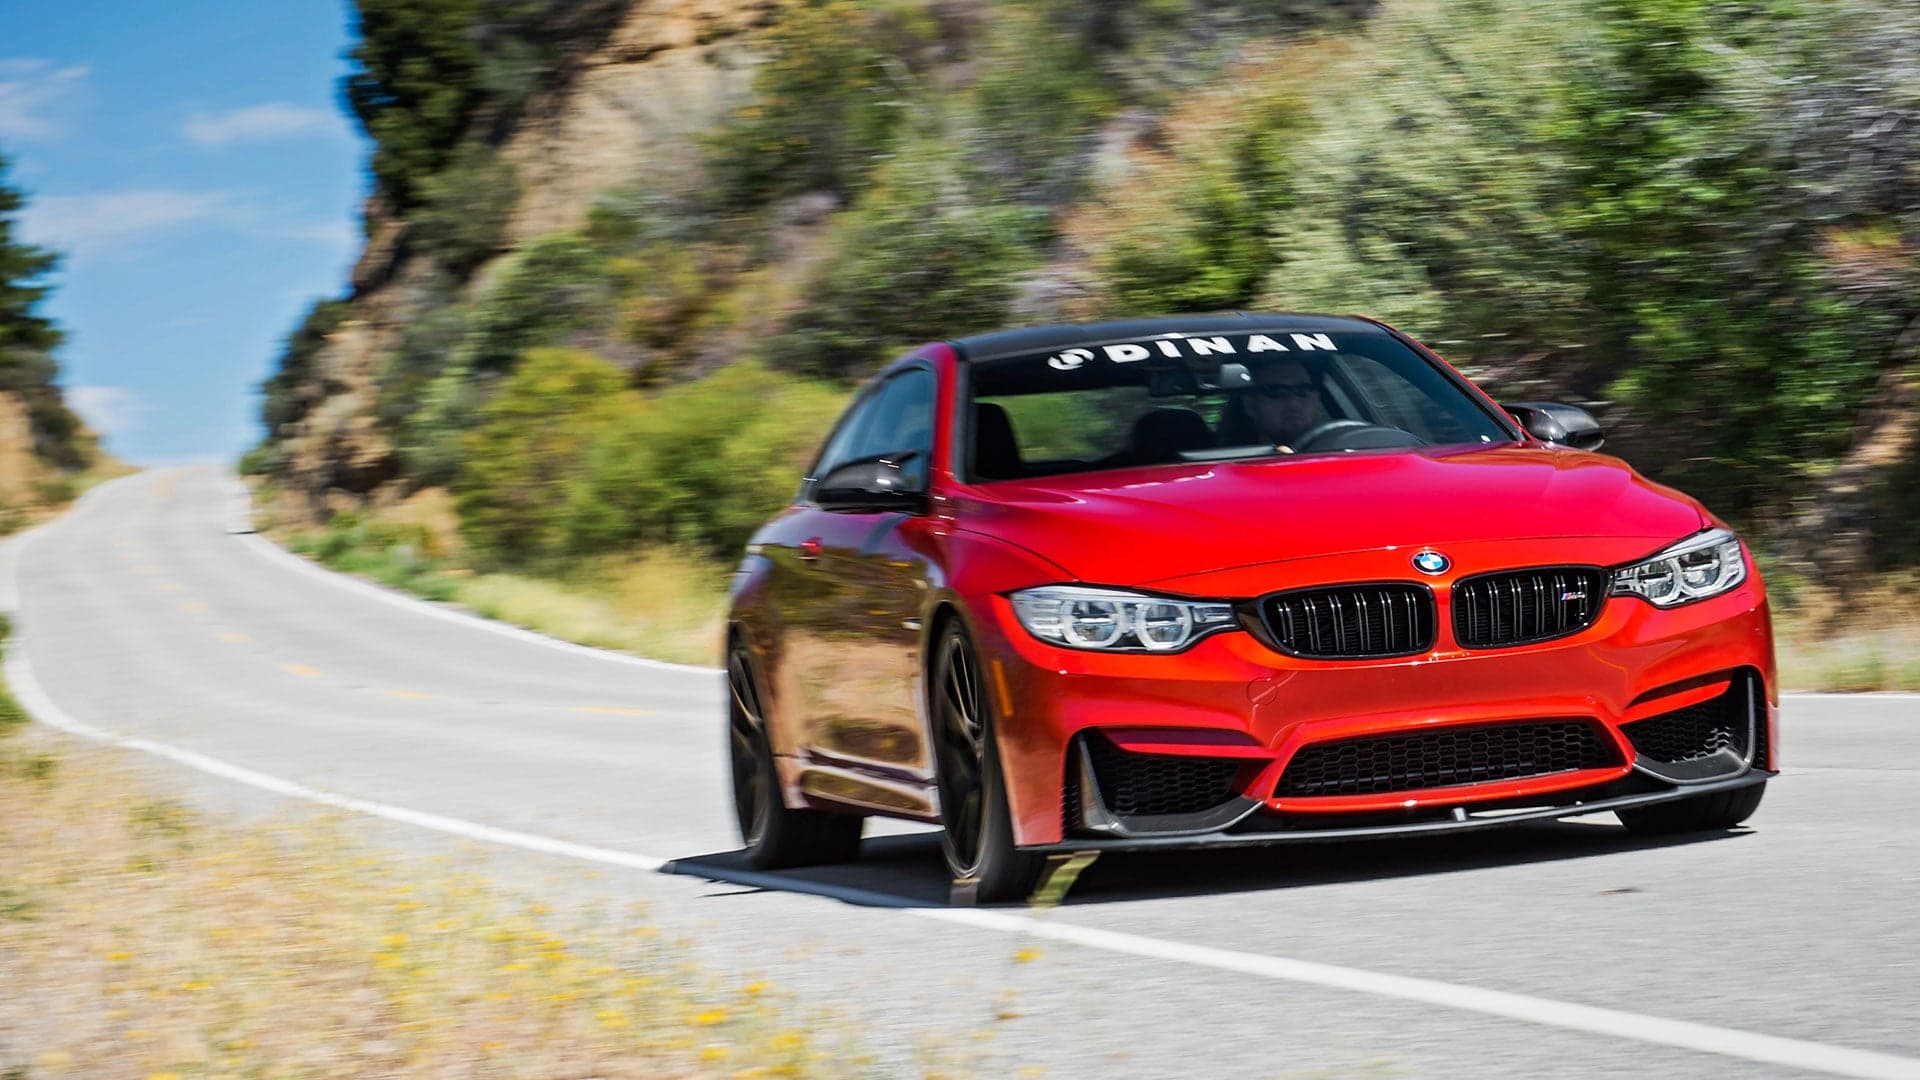 Finding the Edge in a BMW M4 Dinan S1